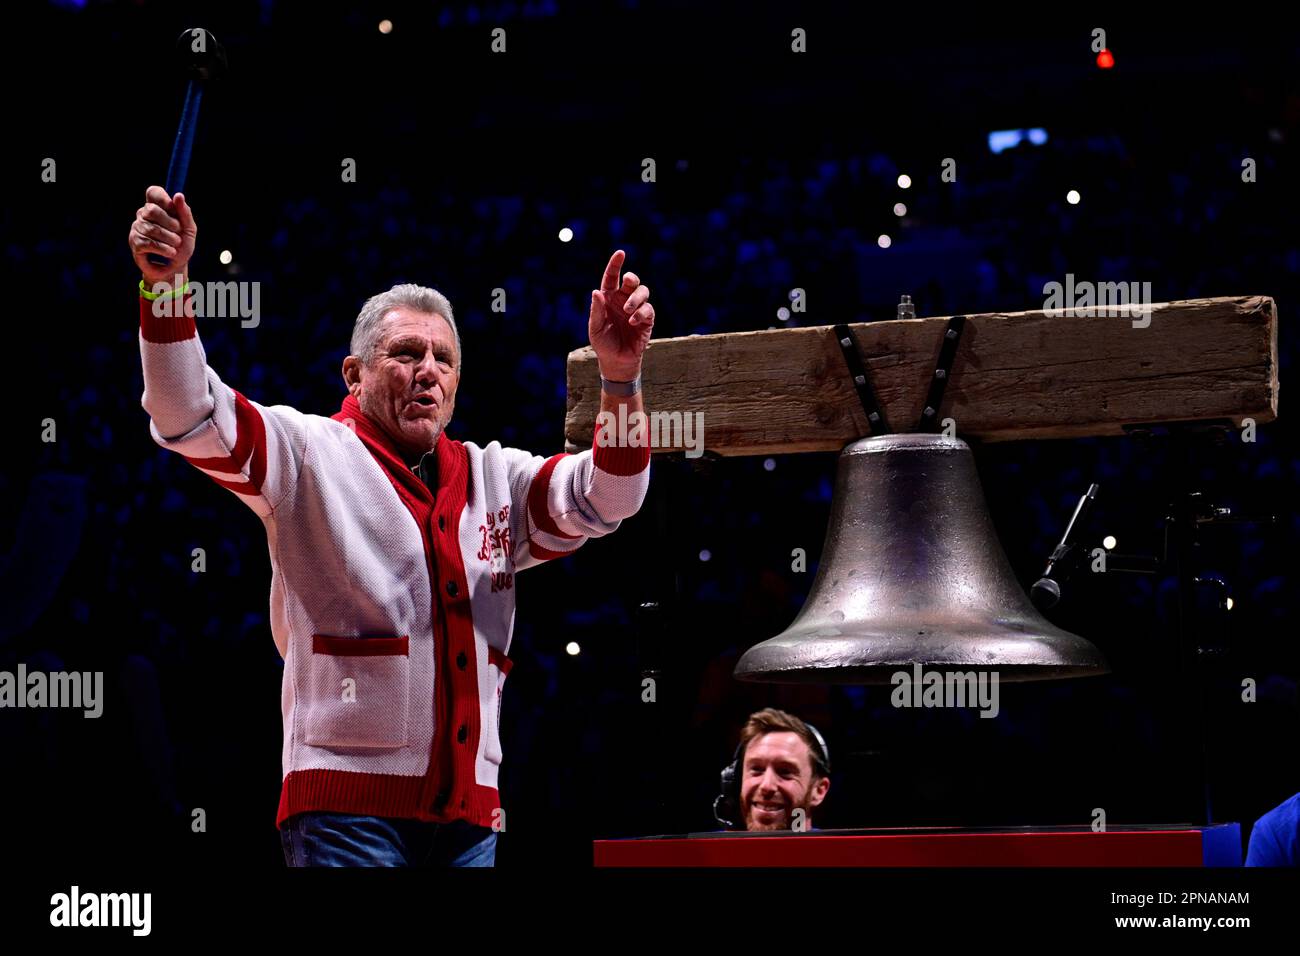 Former MLB player Larry Bowa rings the bell prior to Game 2 in the